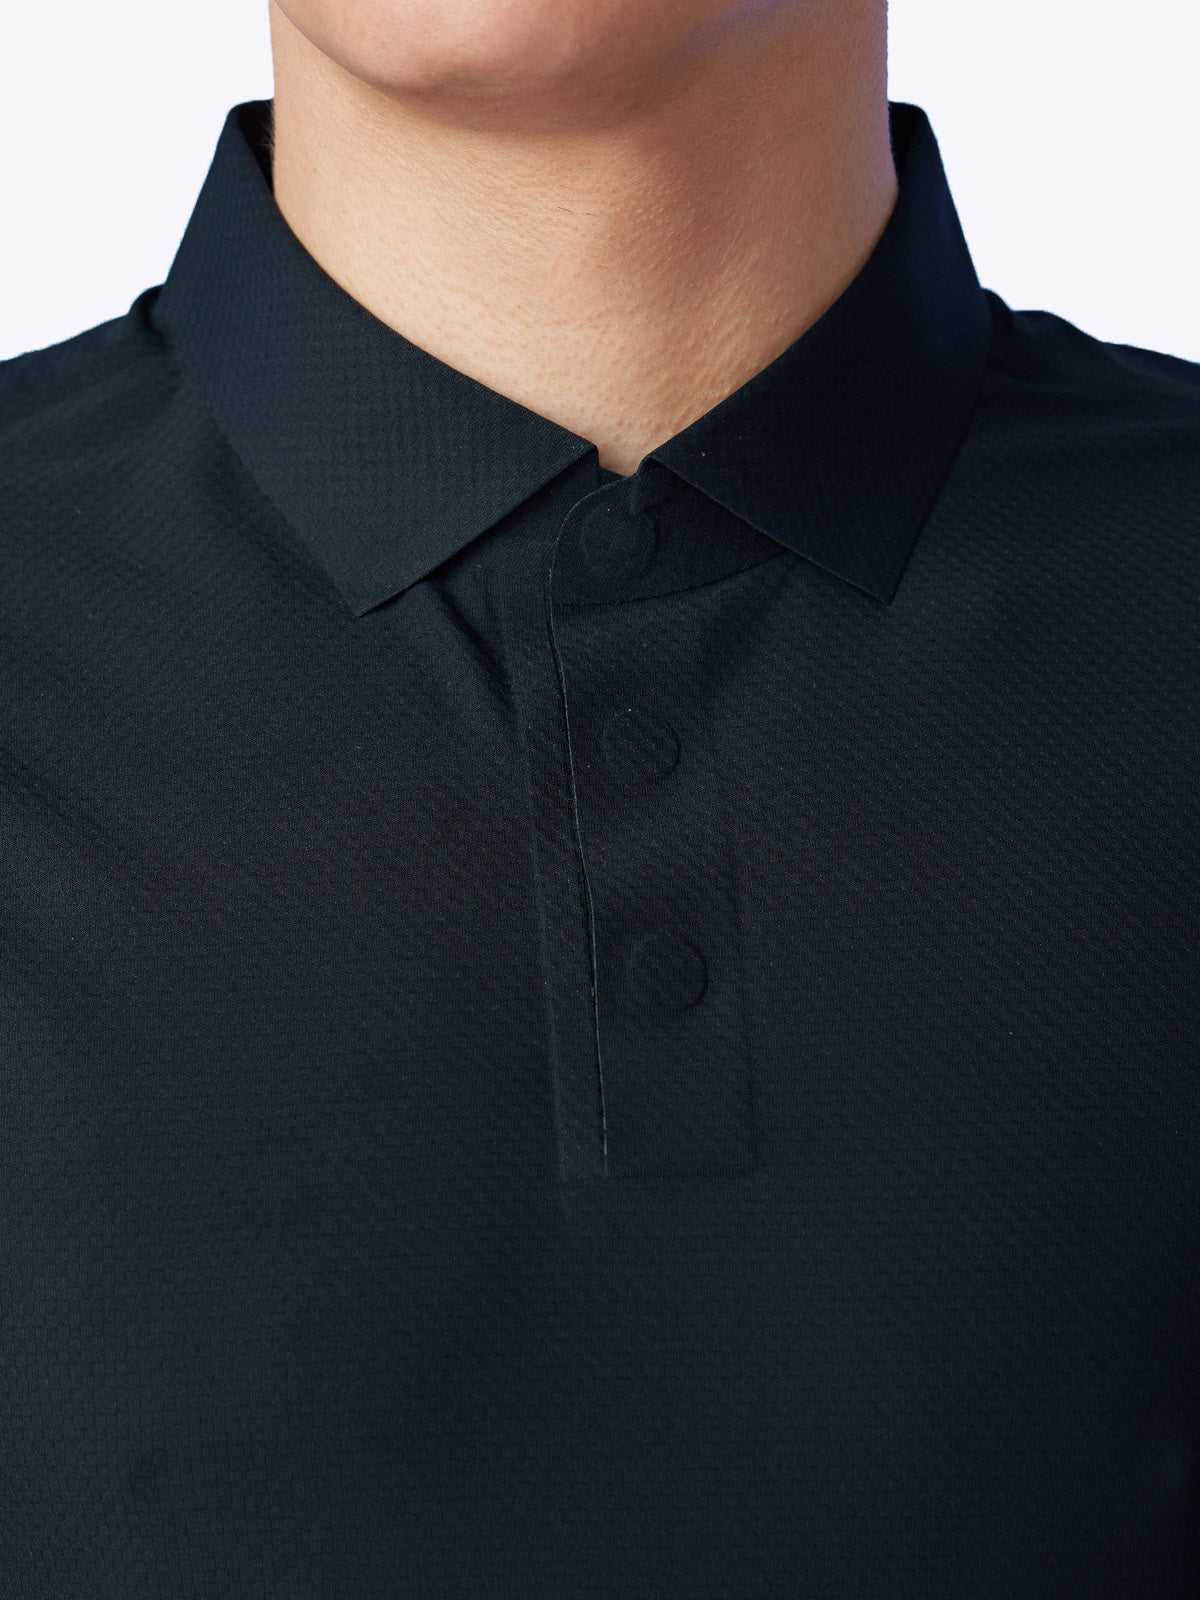 Detailed view of the buttons on the Onyx Loogaroo Gameday Polo, showcasing its refined construction||||Onyx